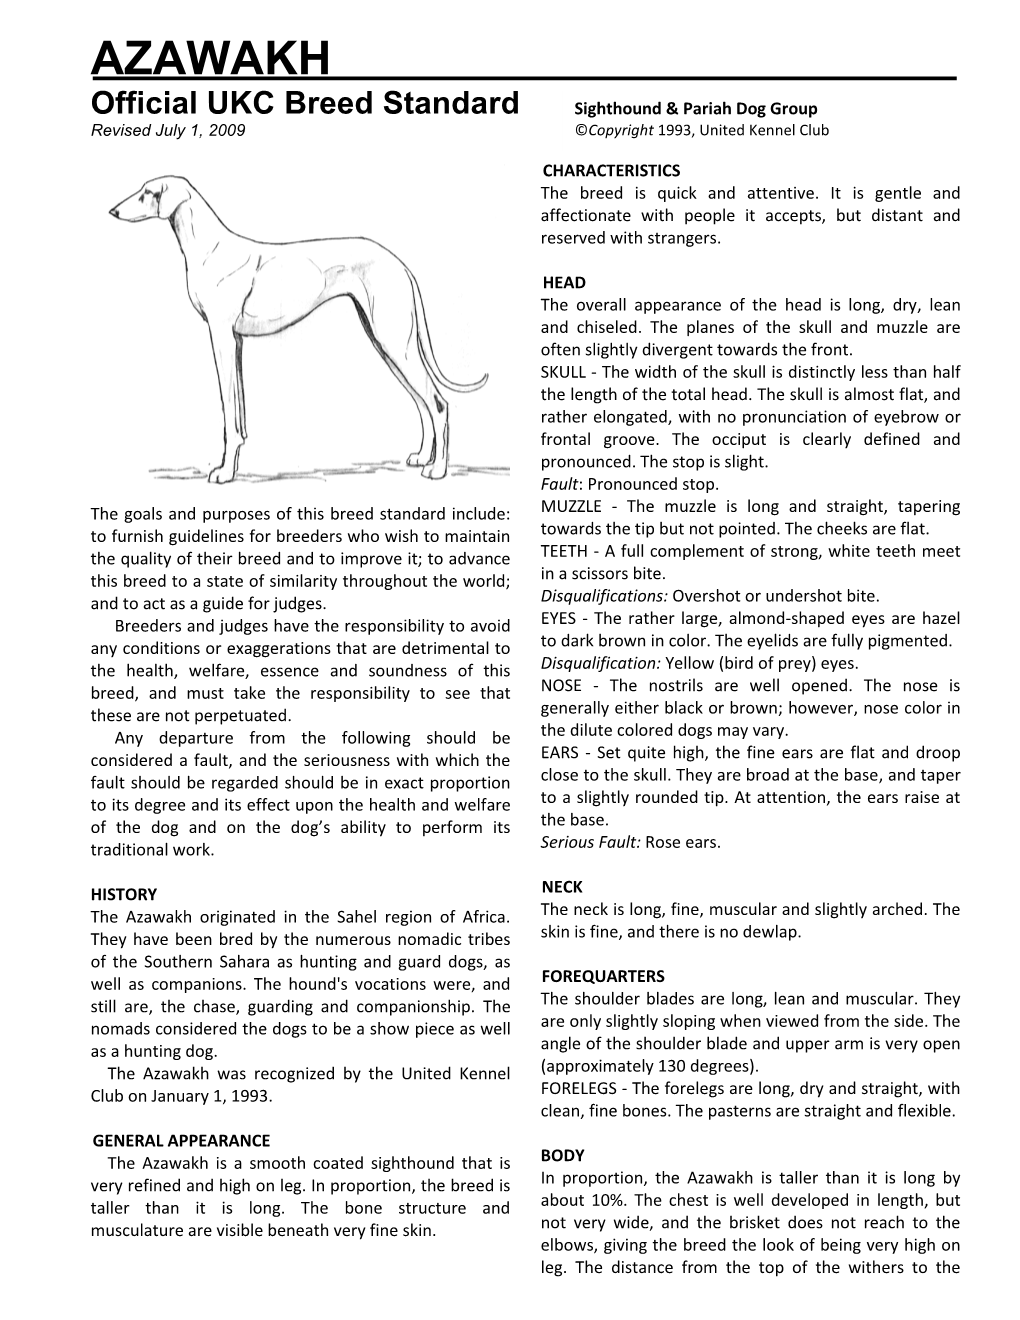 AZAWAKH Official UKC Breed Standard Sighthound & Pariah Dog Group Revised July 1, 2009 ©Copyright 1993, United Kennel Club